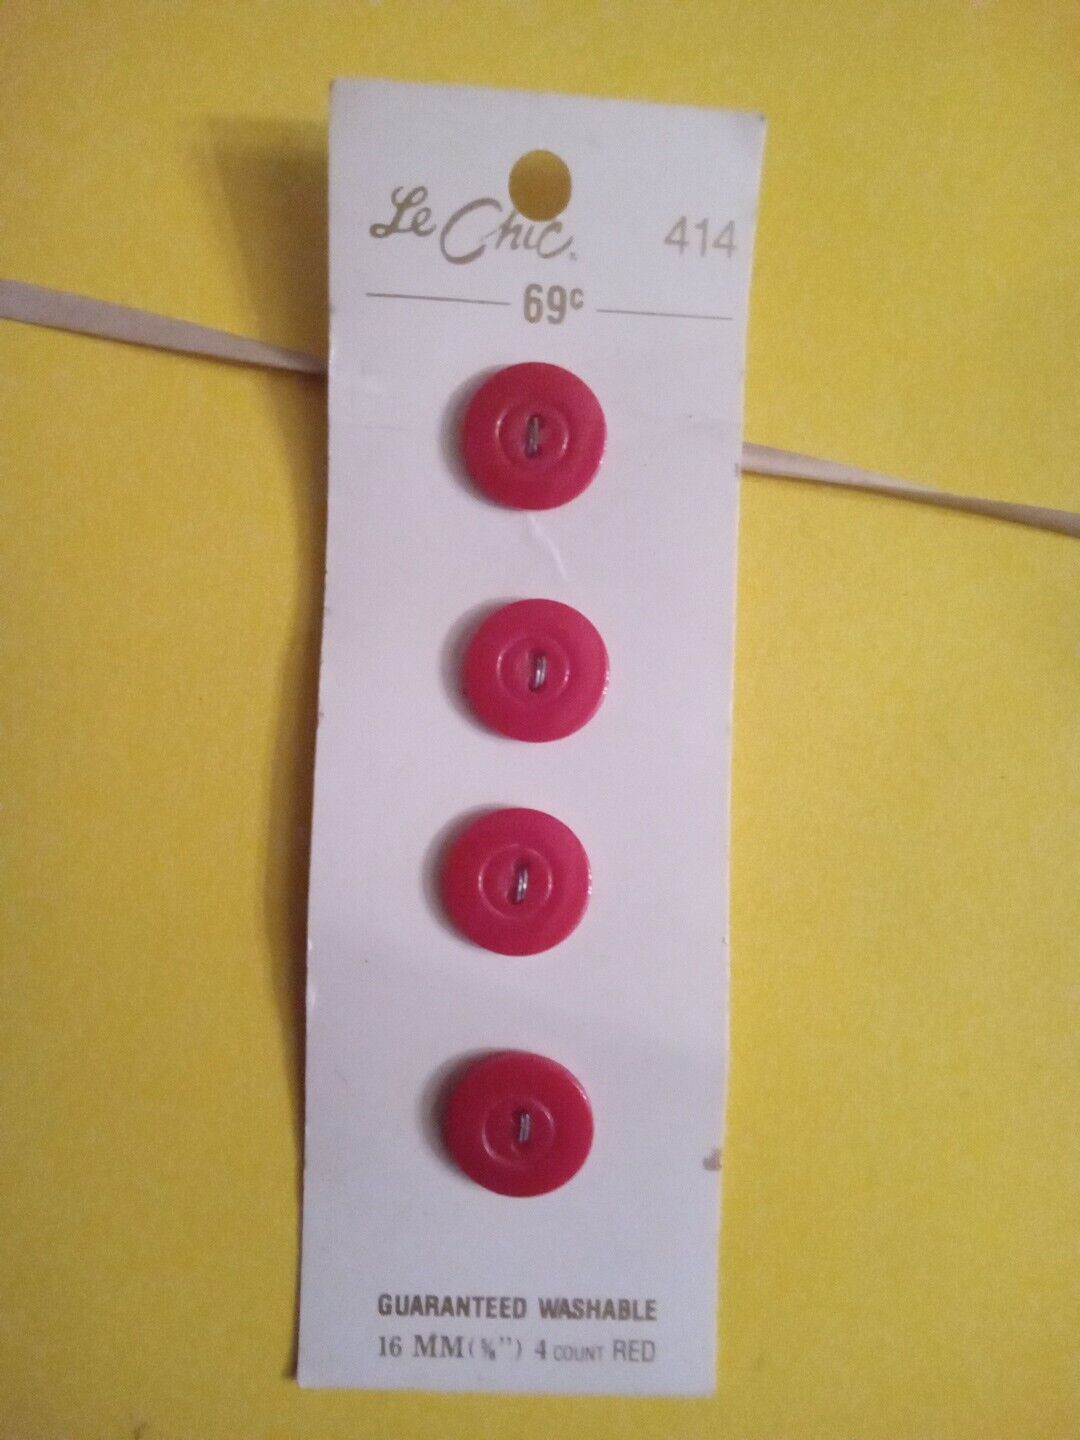 Vintage Le Chic Buttons Red Item 414 4 Buttons On Card 5/8